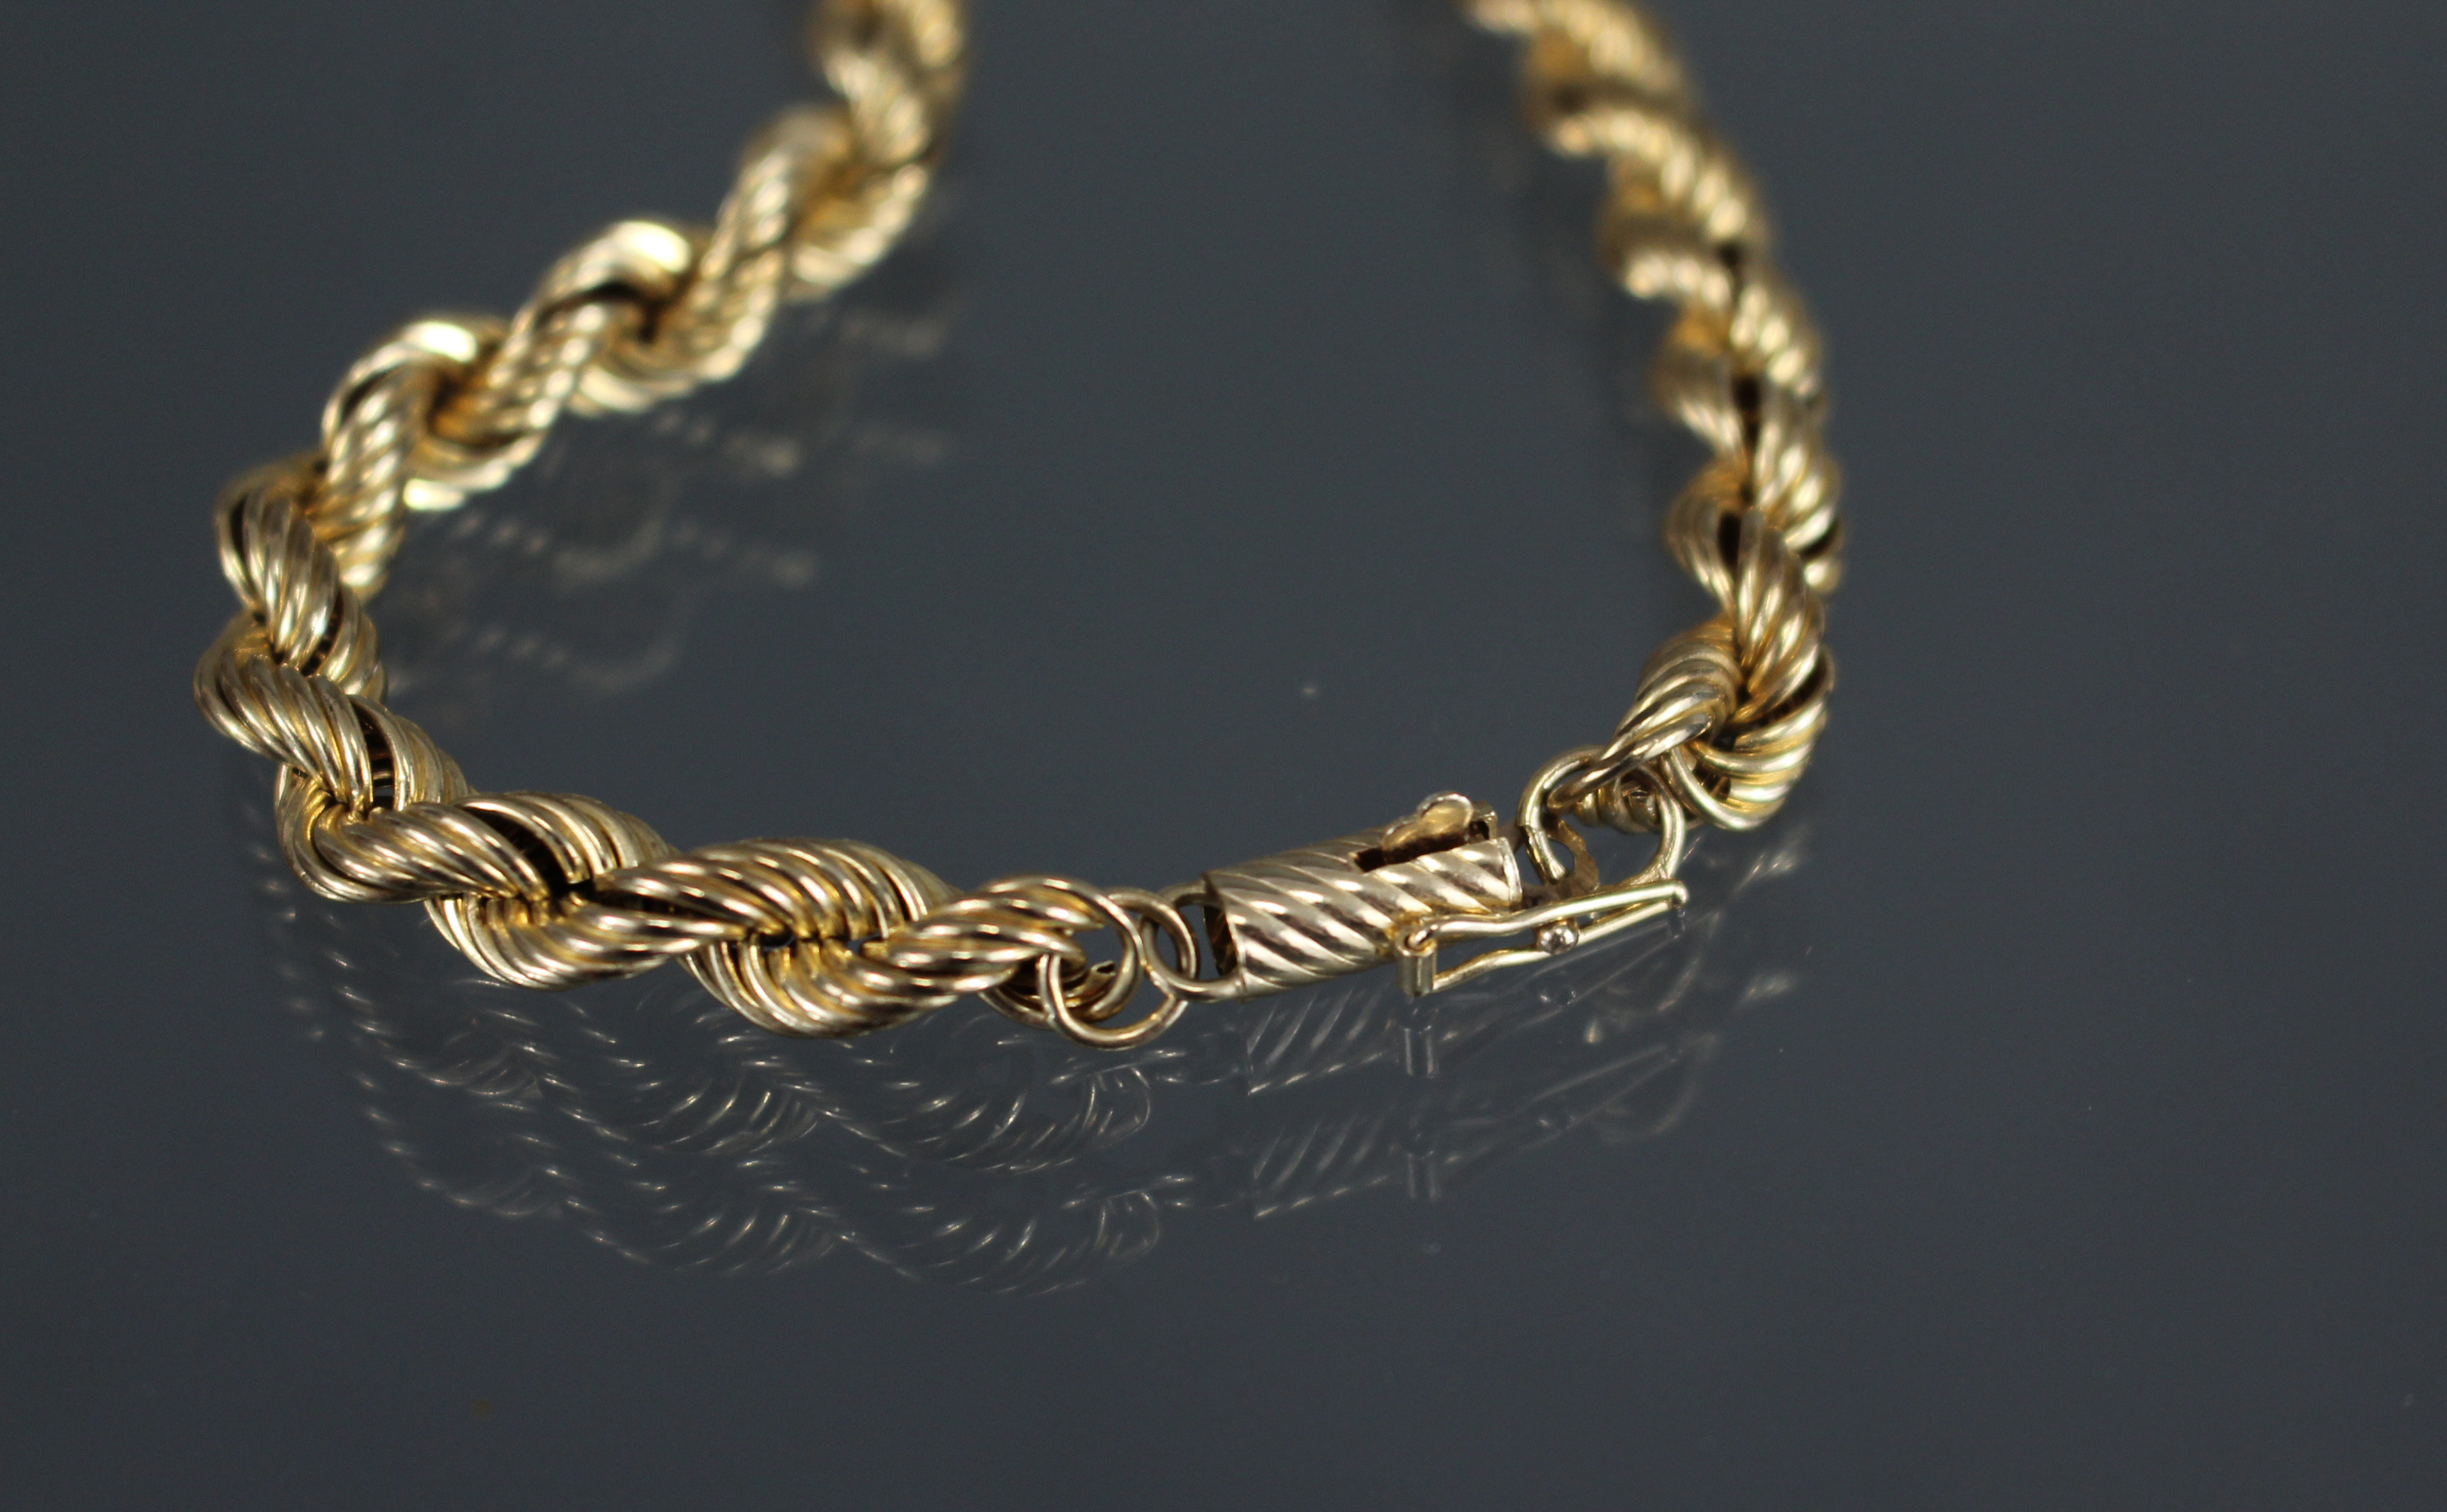 A 9ct. gold necklace of rope-twist design; 24” long. (14.3gm). - Image 3 of 3